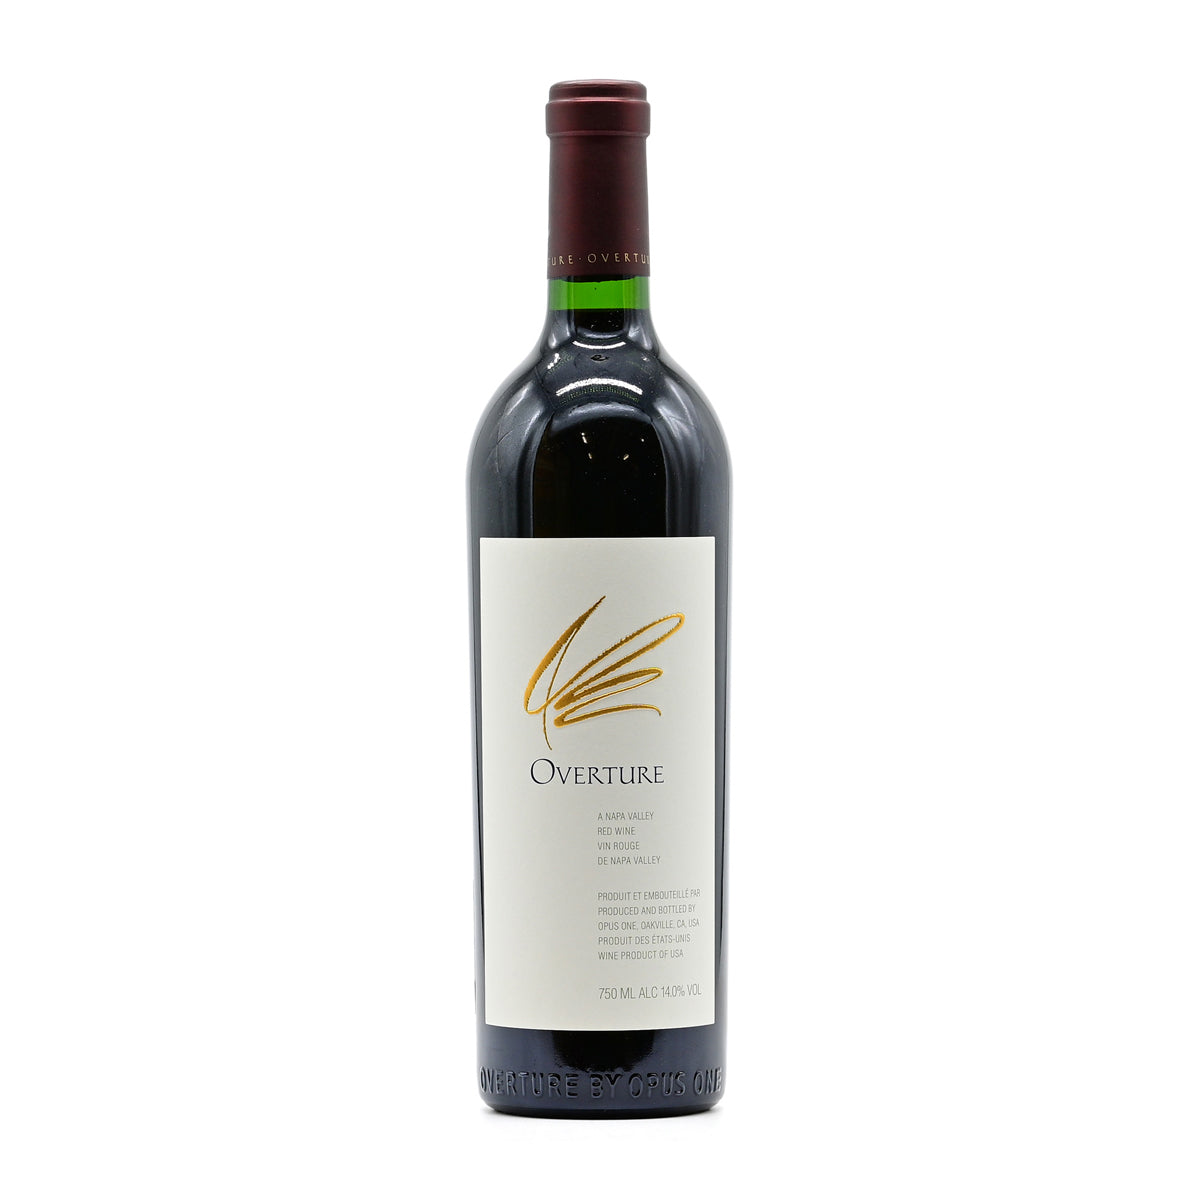 Overture NV, 2022 Release, 750ml American red wine, from Opus One, Napa Valley, California, USA – GDV Fine Wines, Hong Kong